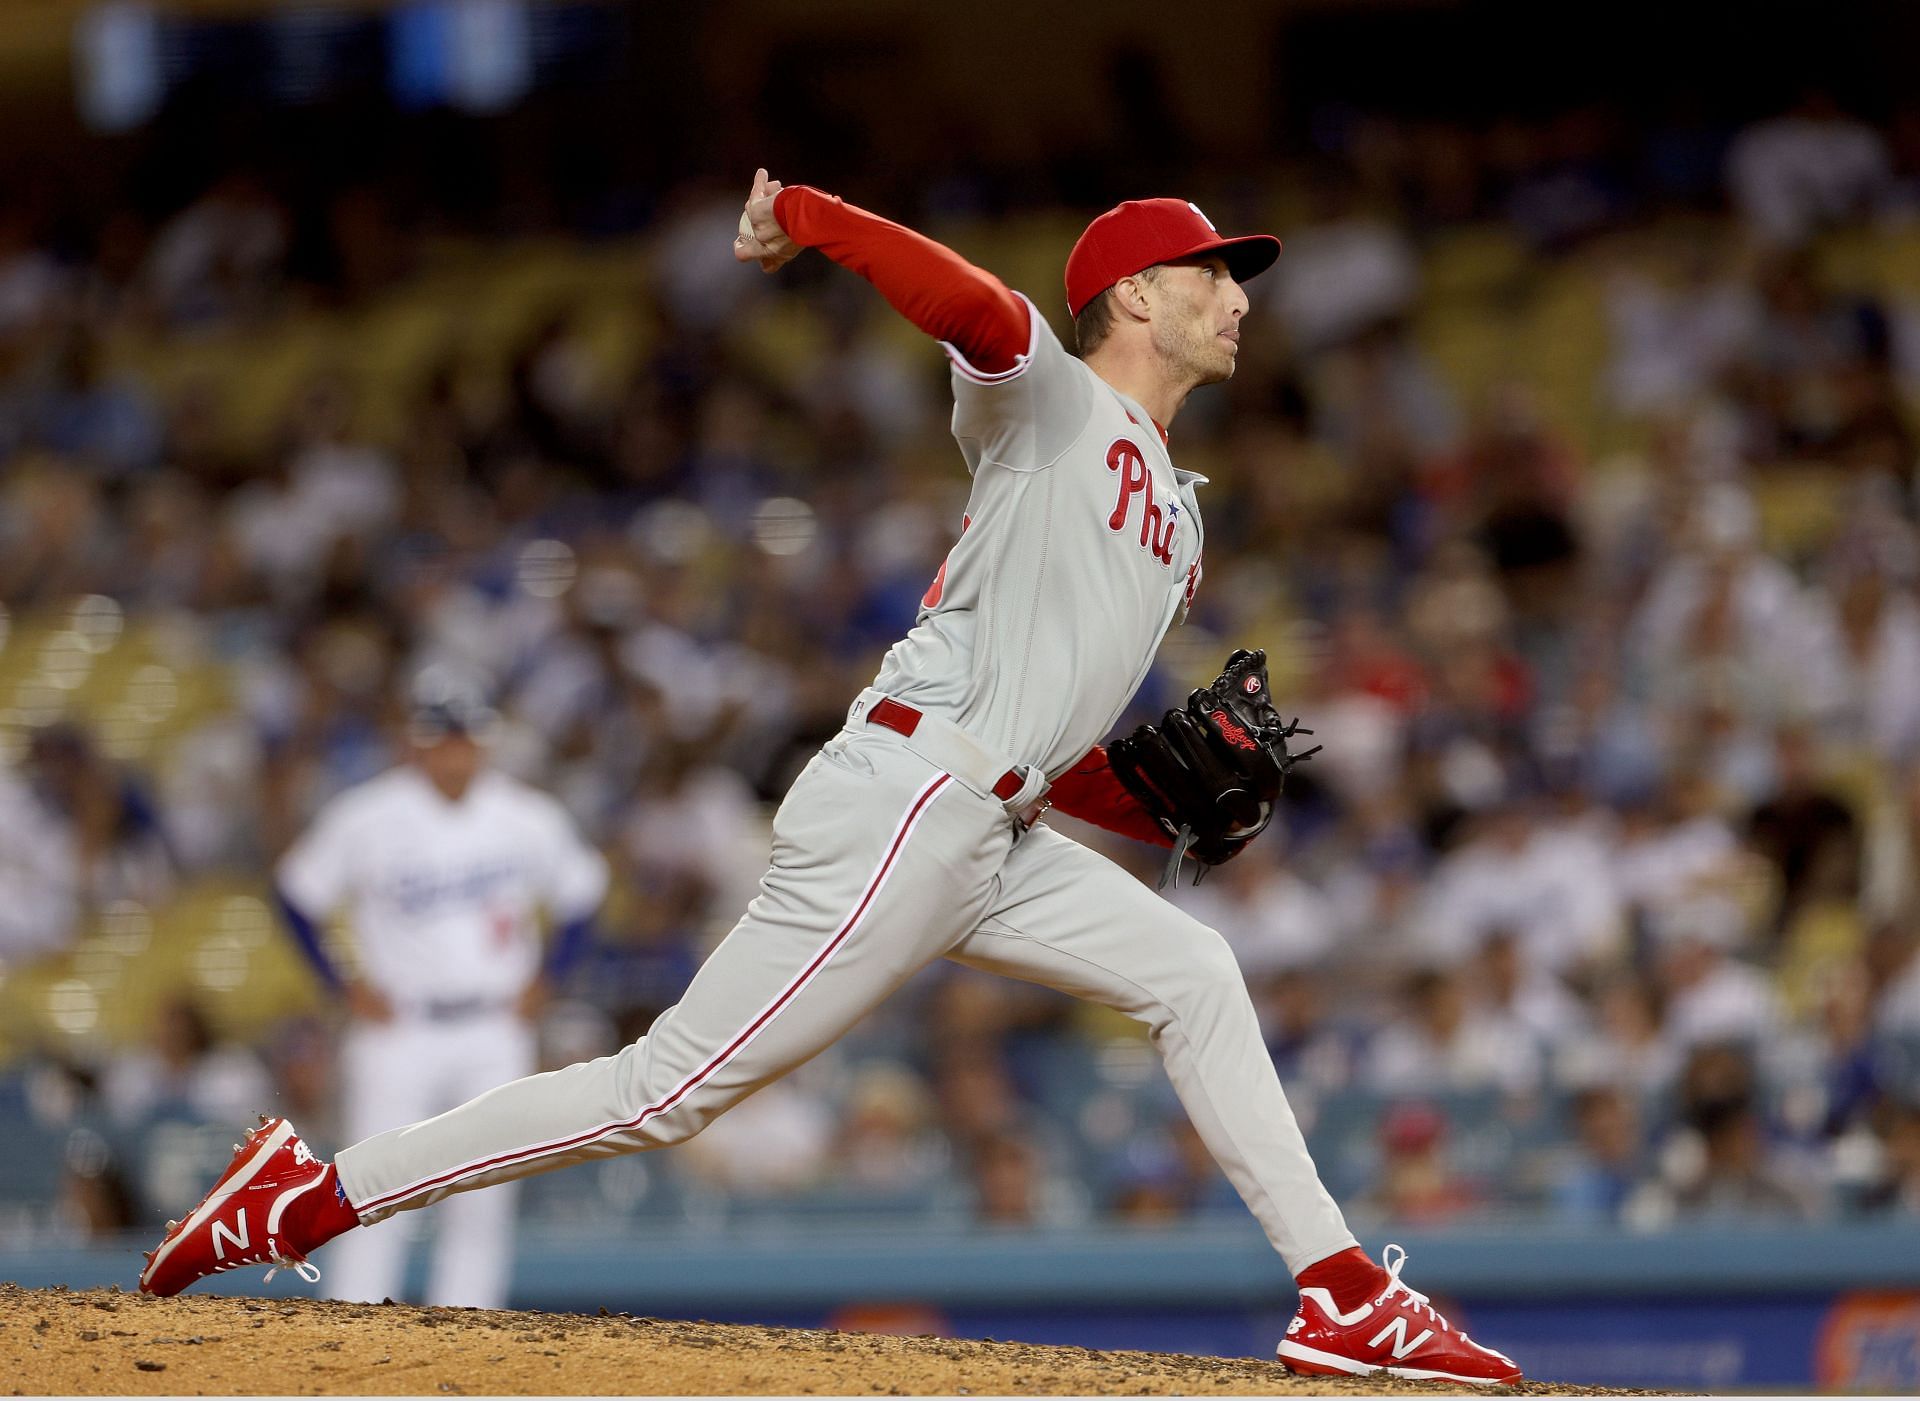 Connor Brogdon pitches during a Philadelphia Phillies v Los Angeles Dodgers game at Dodger Stadium.